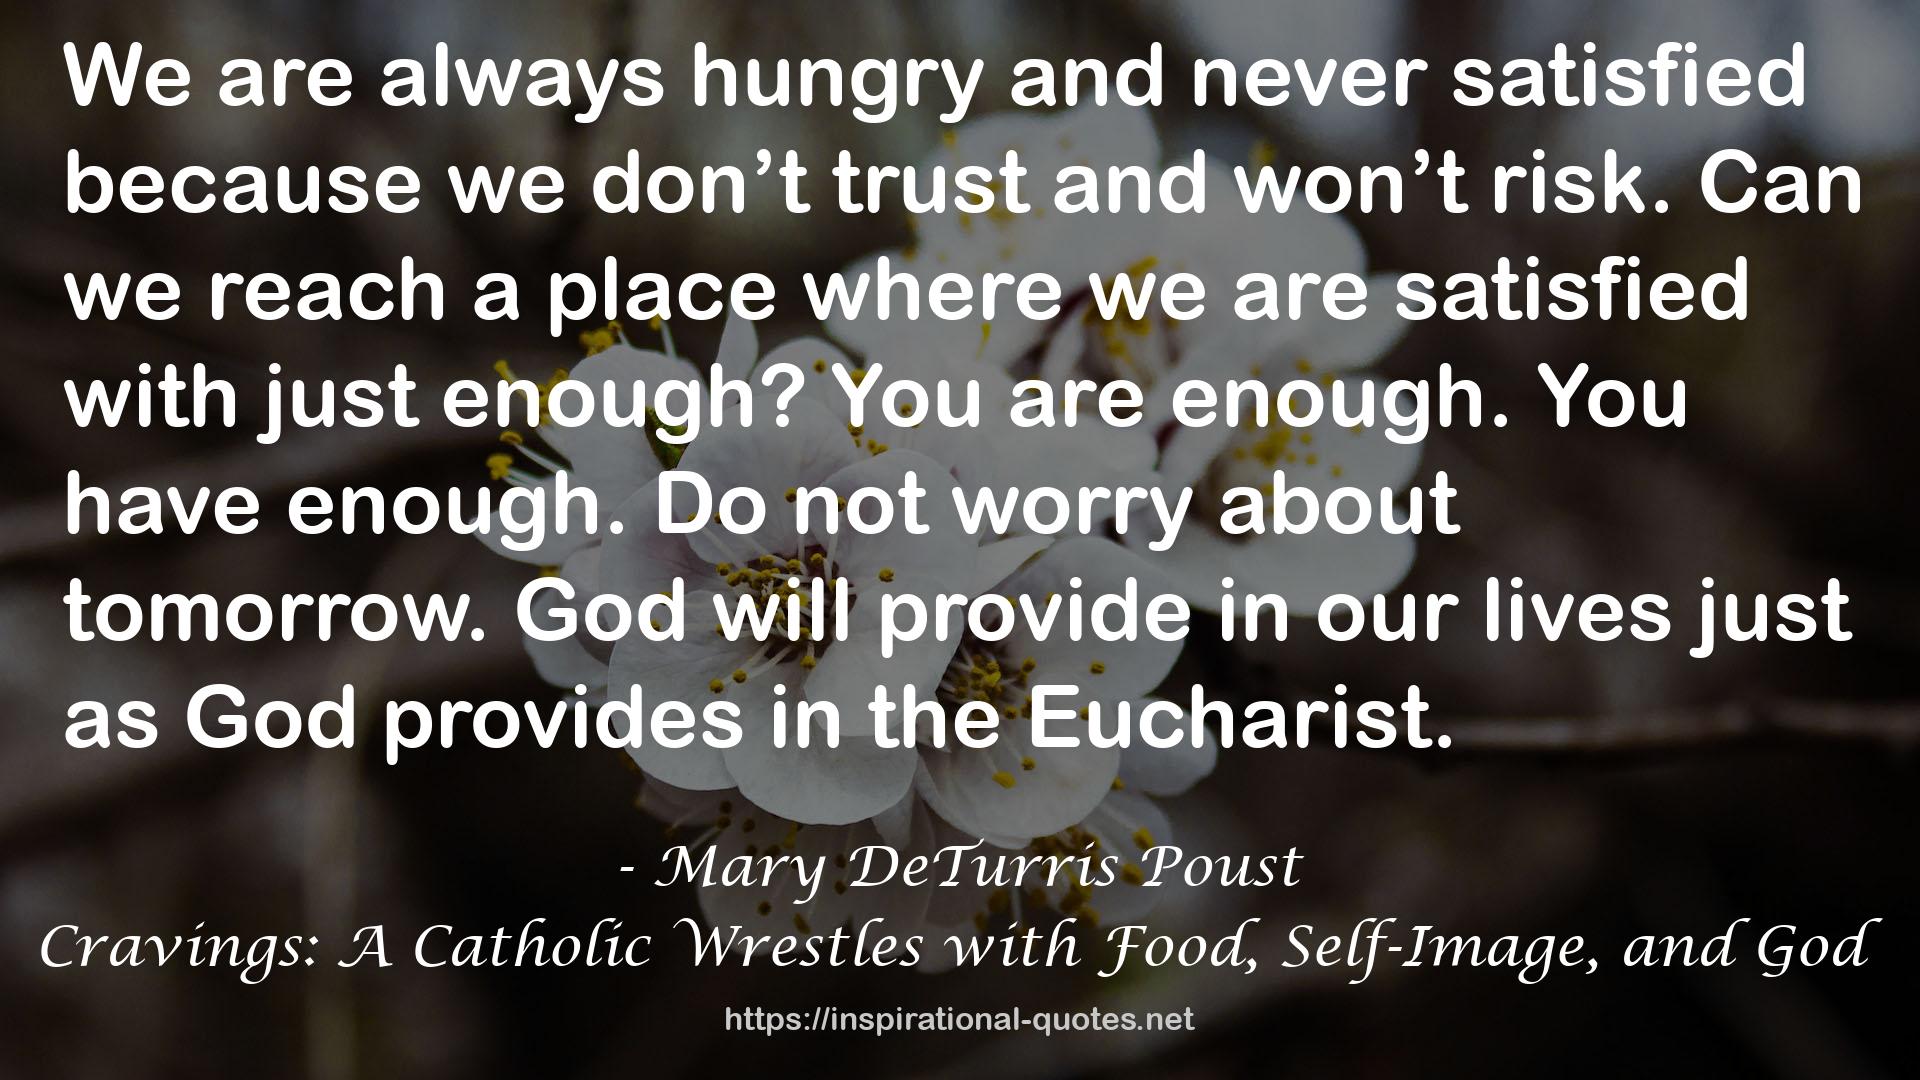 Cravings: A Catholic Wrestles with Food, Self-Image, and God QUOTES